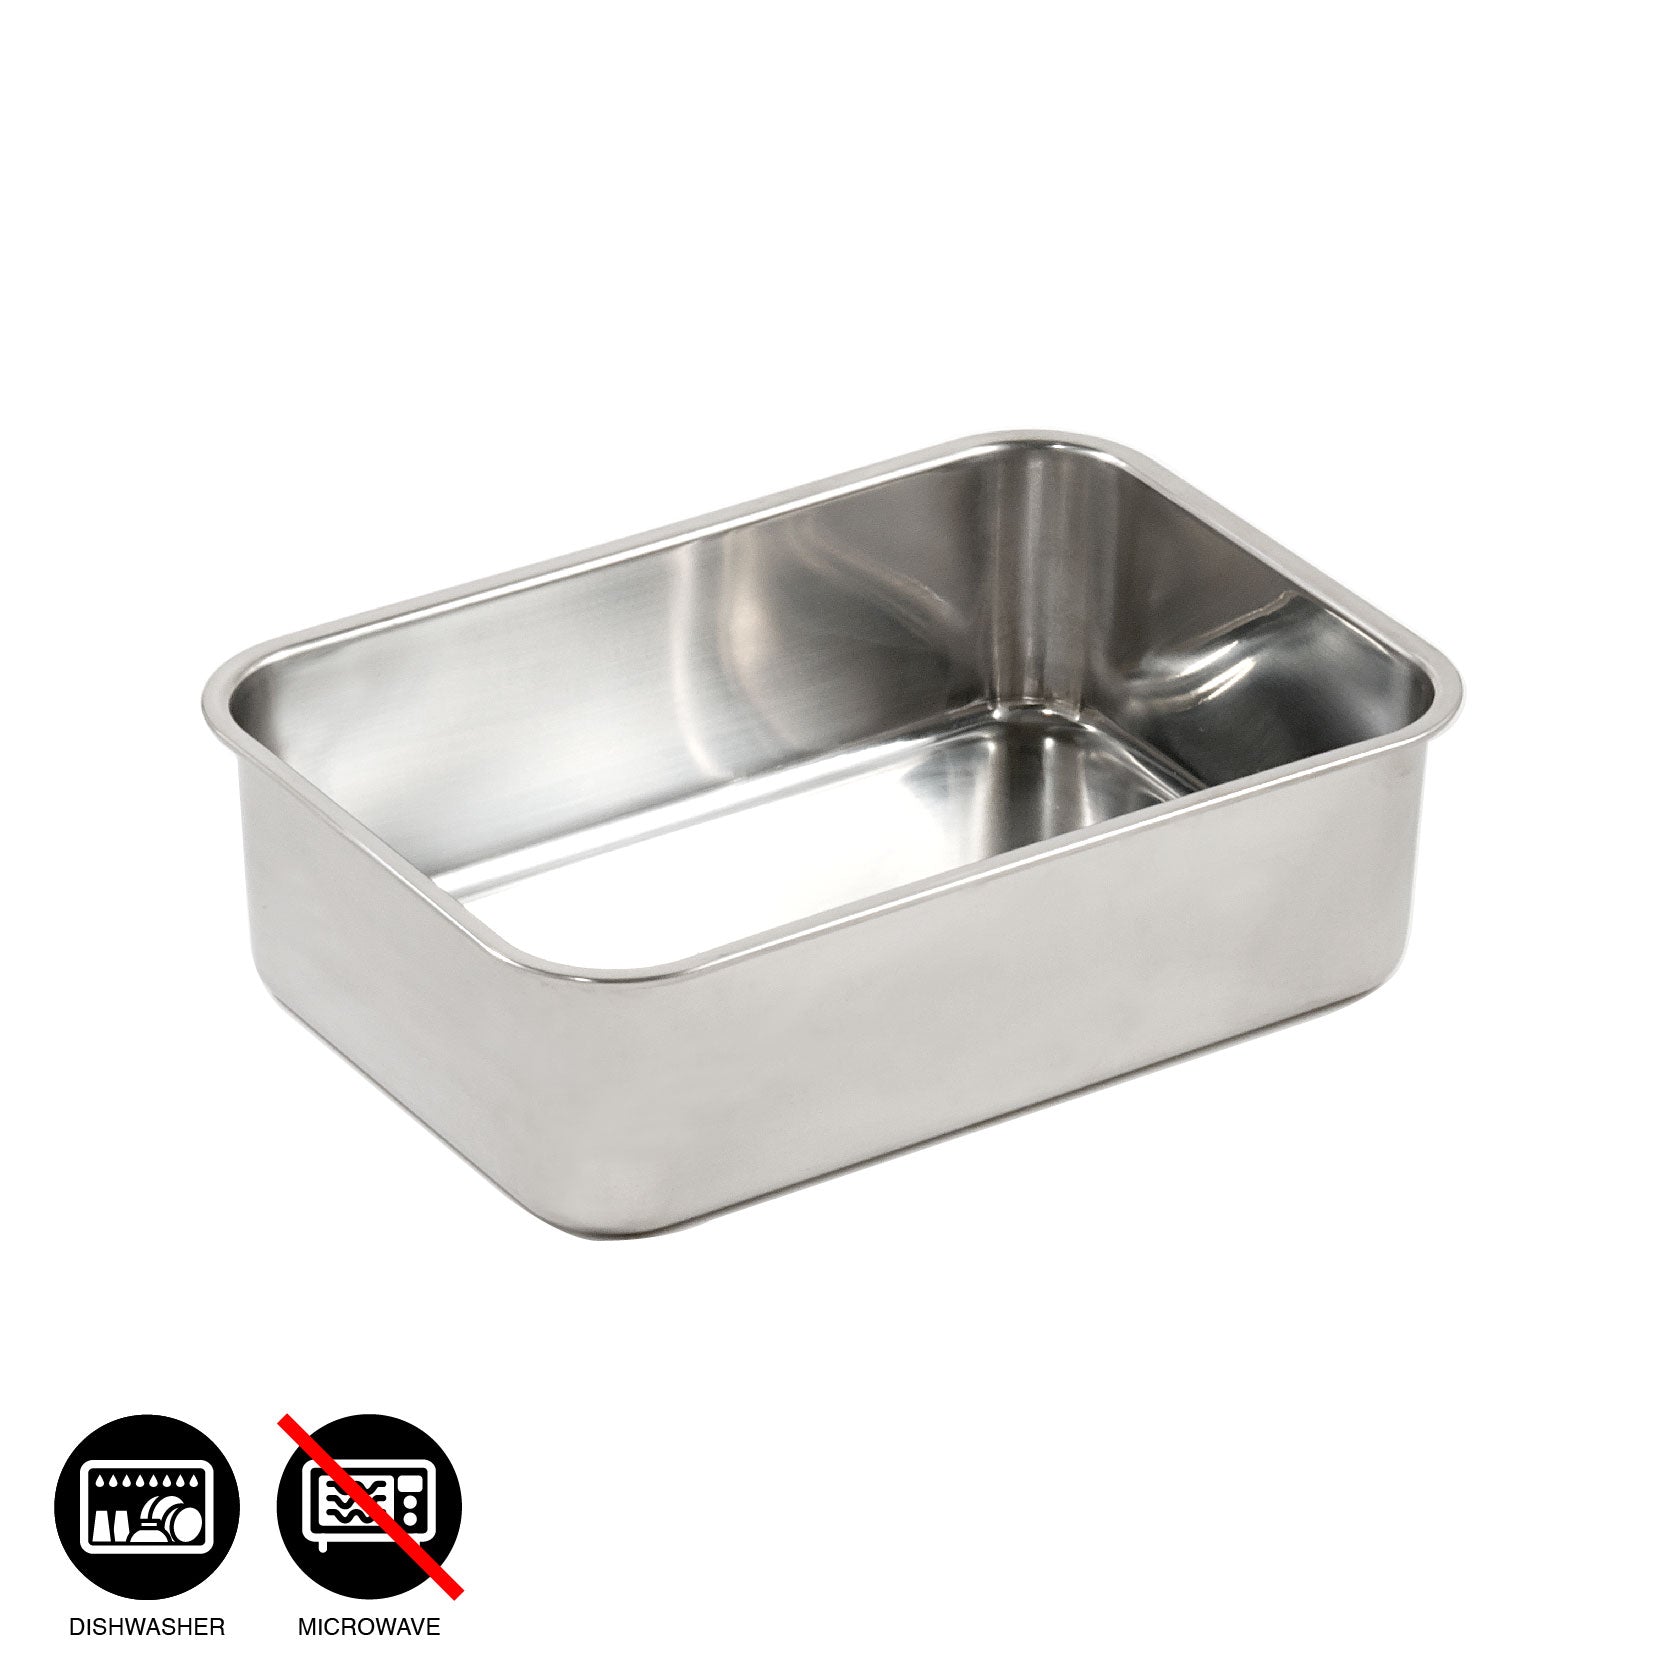 CLOVER Stainless steel container / No.00 - No.5